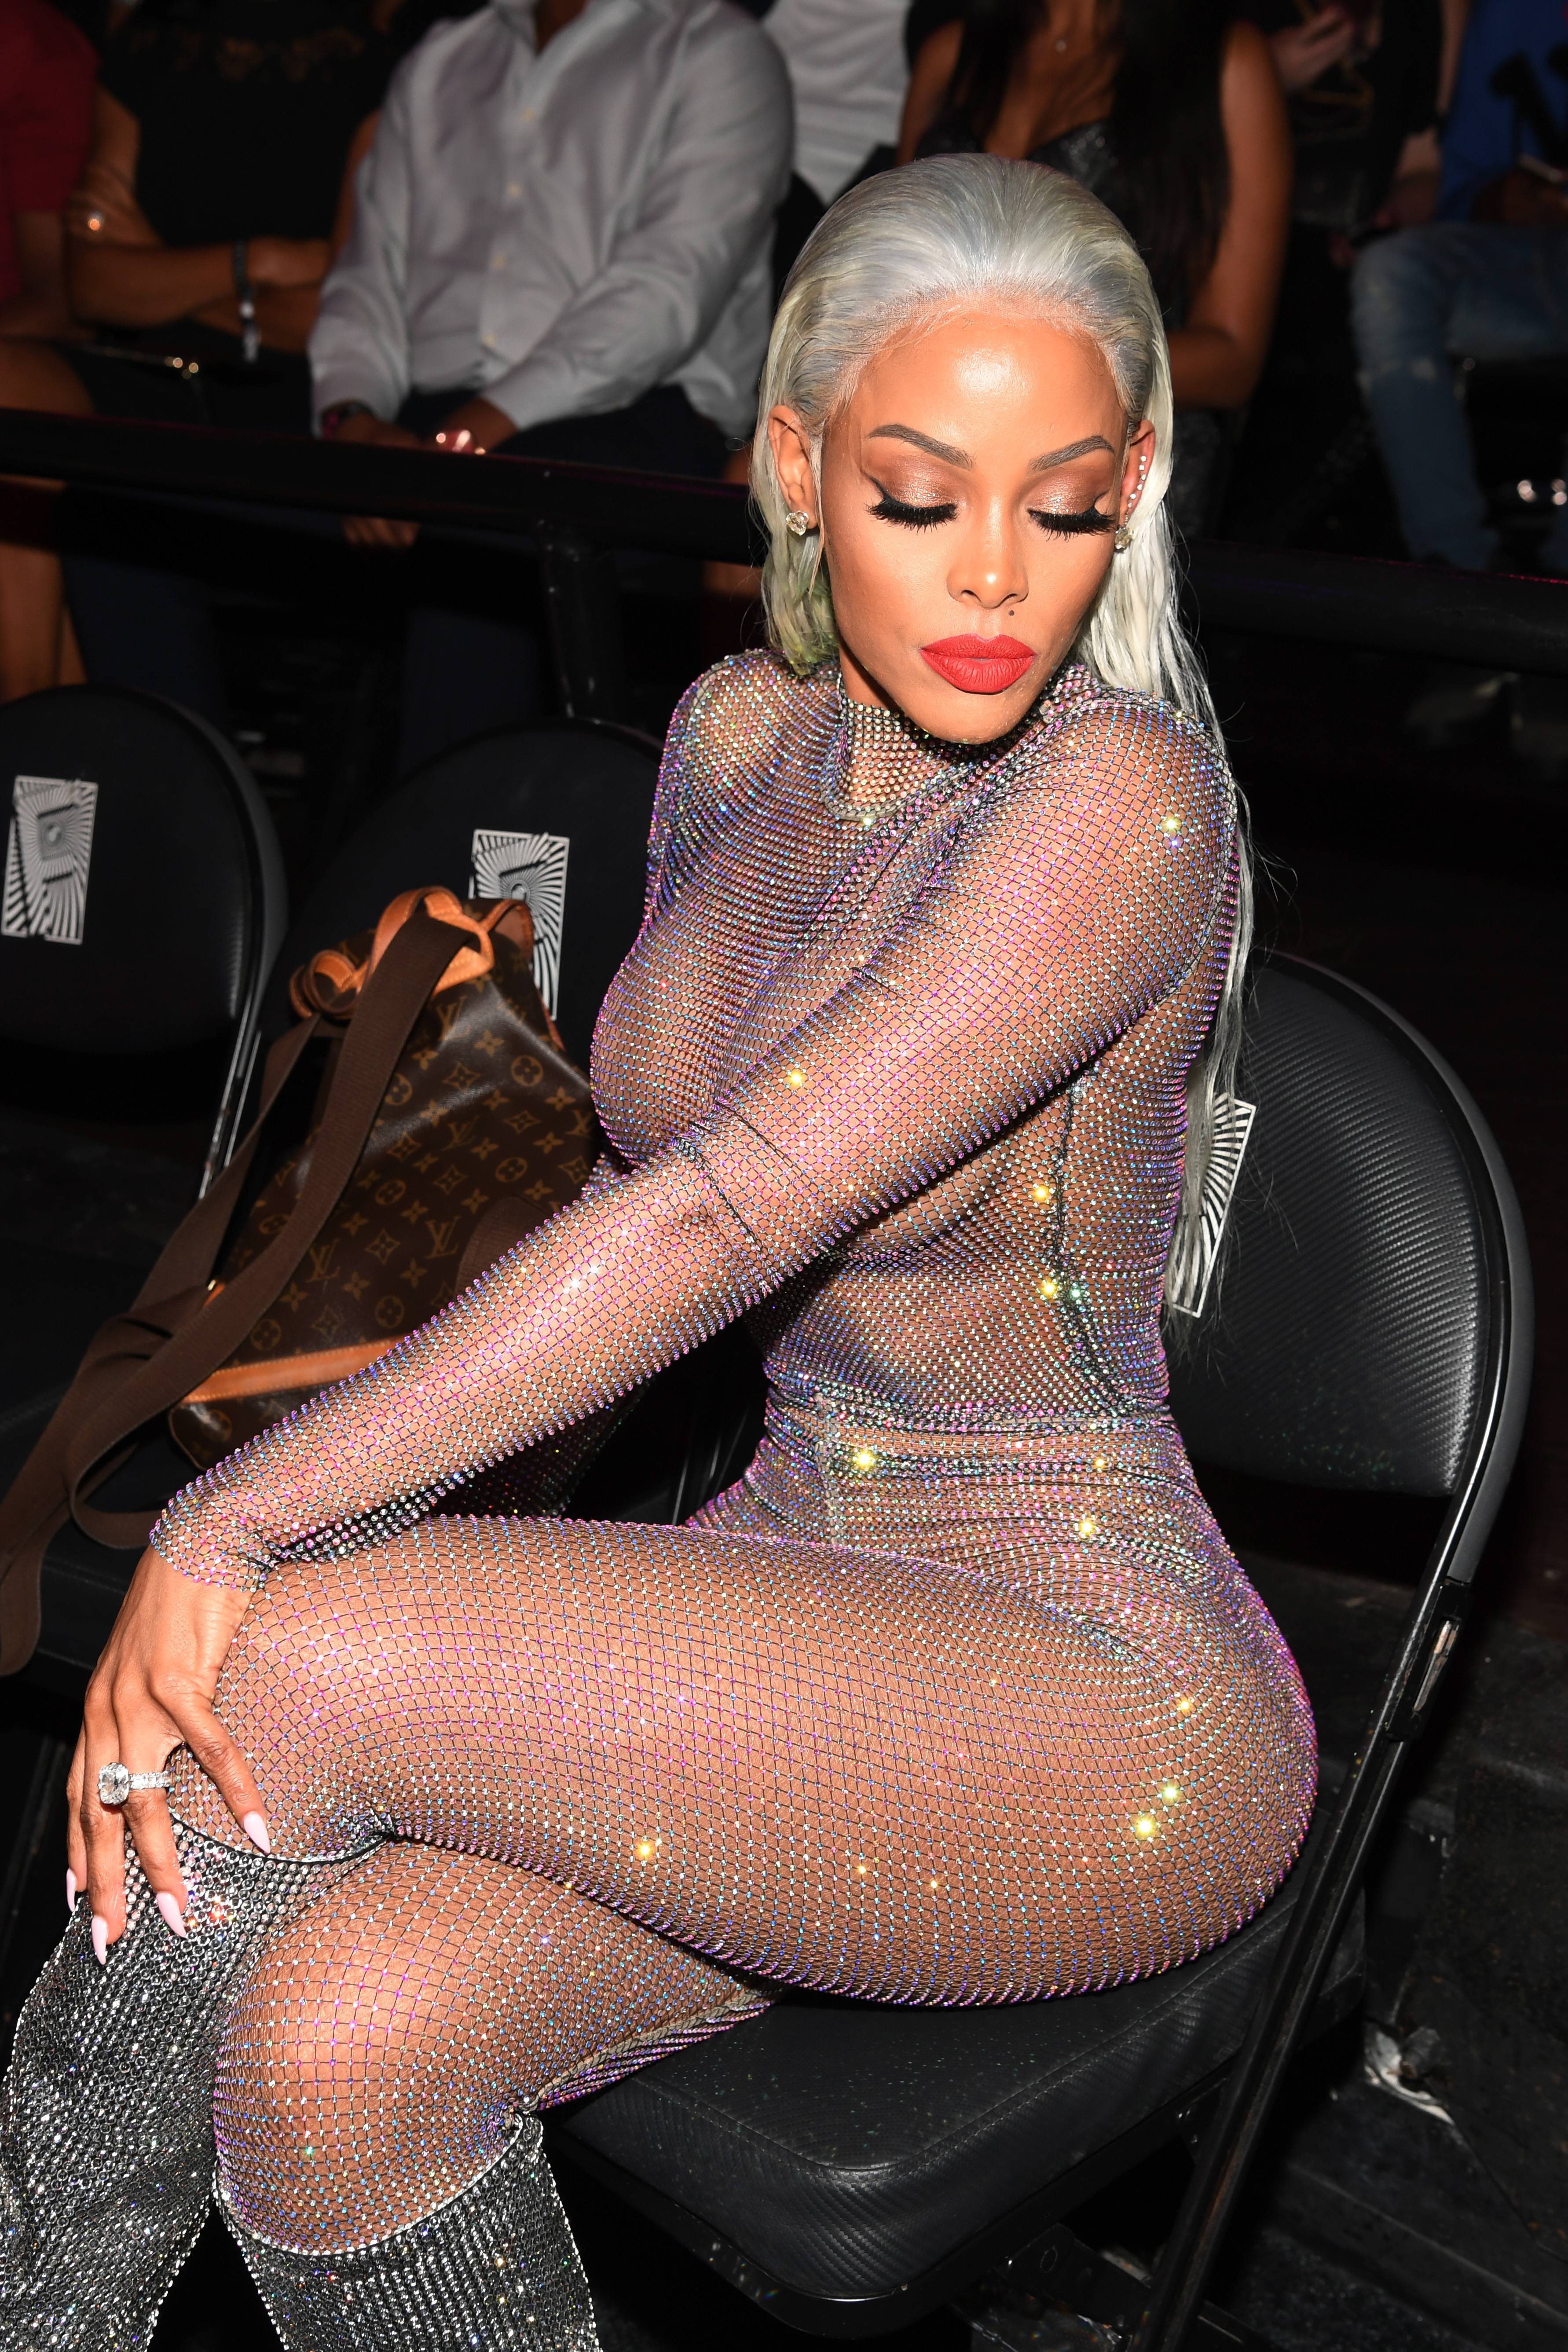 (Photo by Paras Griffin/Getty Images for BET)